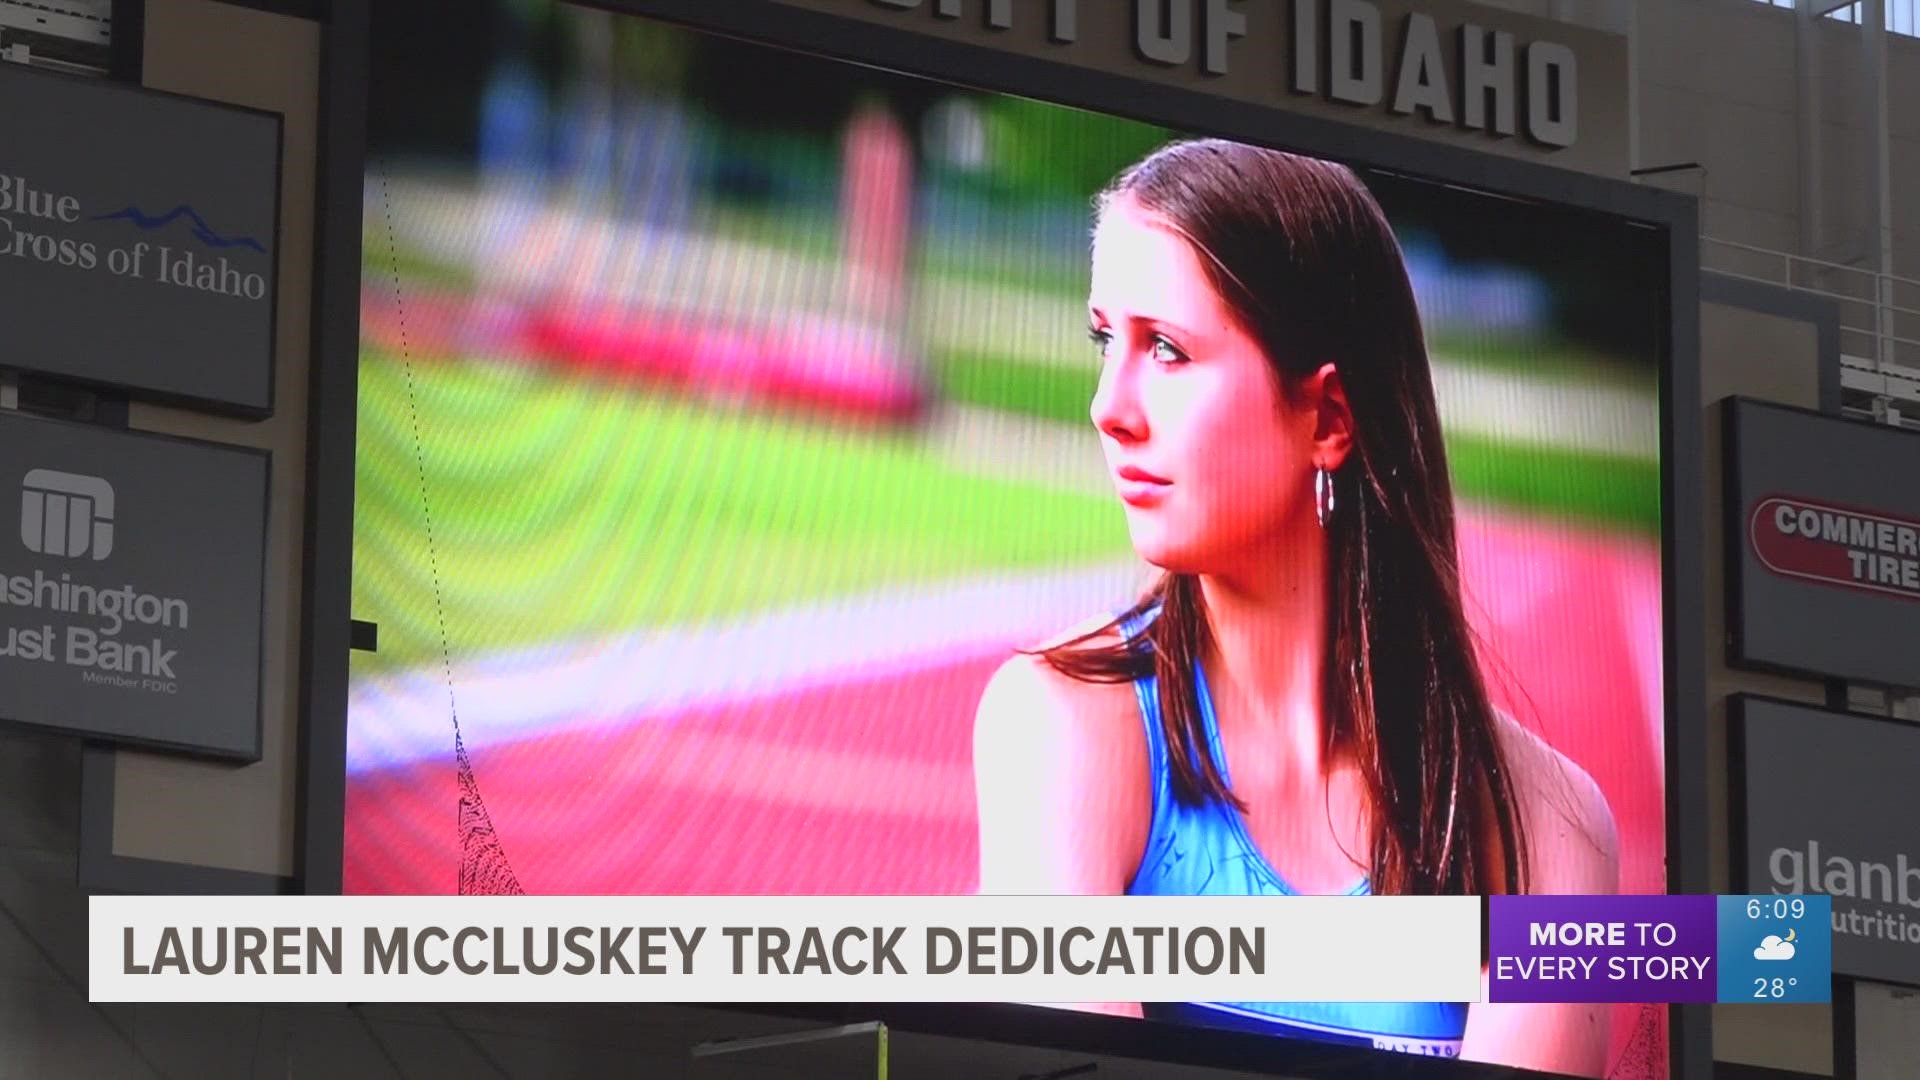 The track was named in honor of McCluskey and her time in University of Idaho's Athletic program.